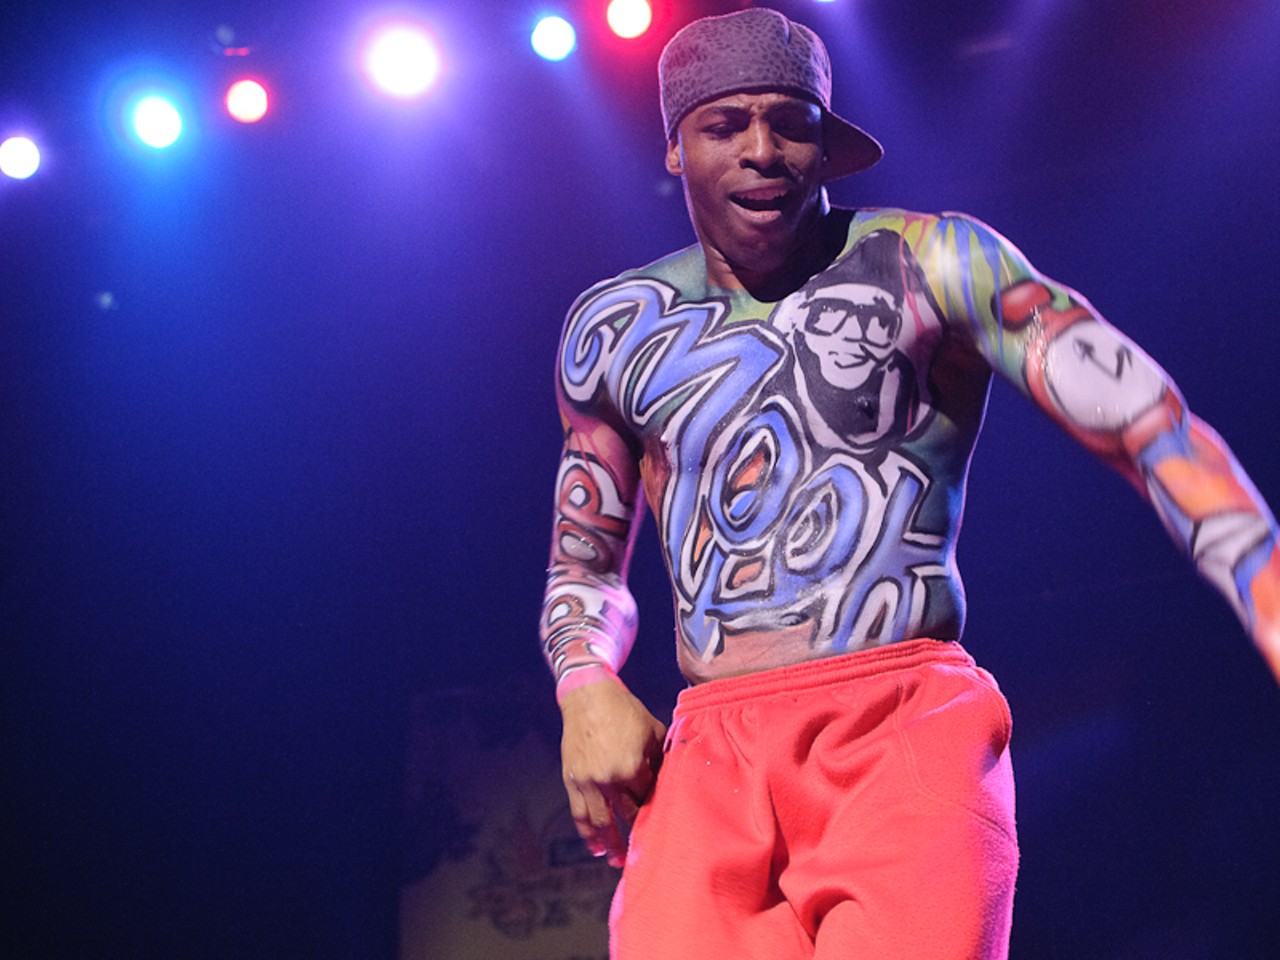 This performer's credo? Hip-hop ain't dead, so let's kick it old-school.